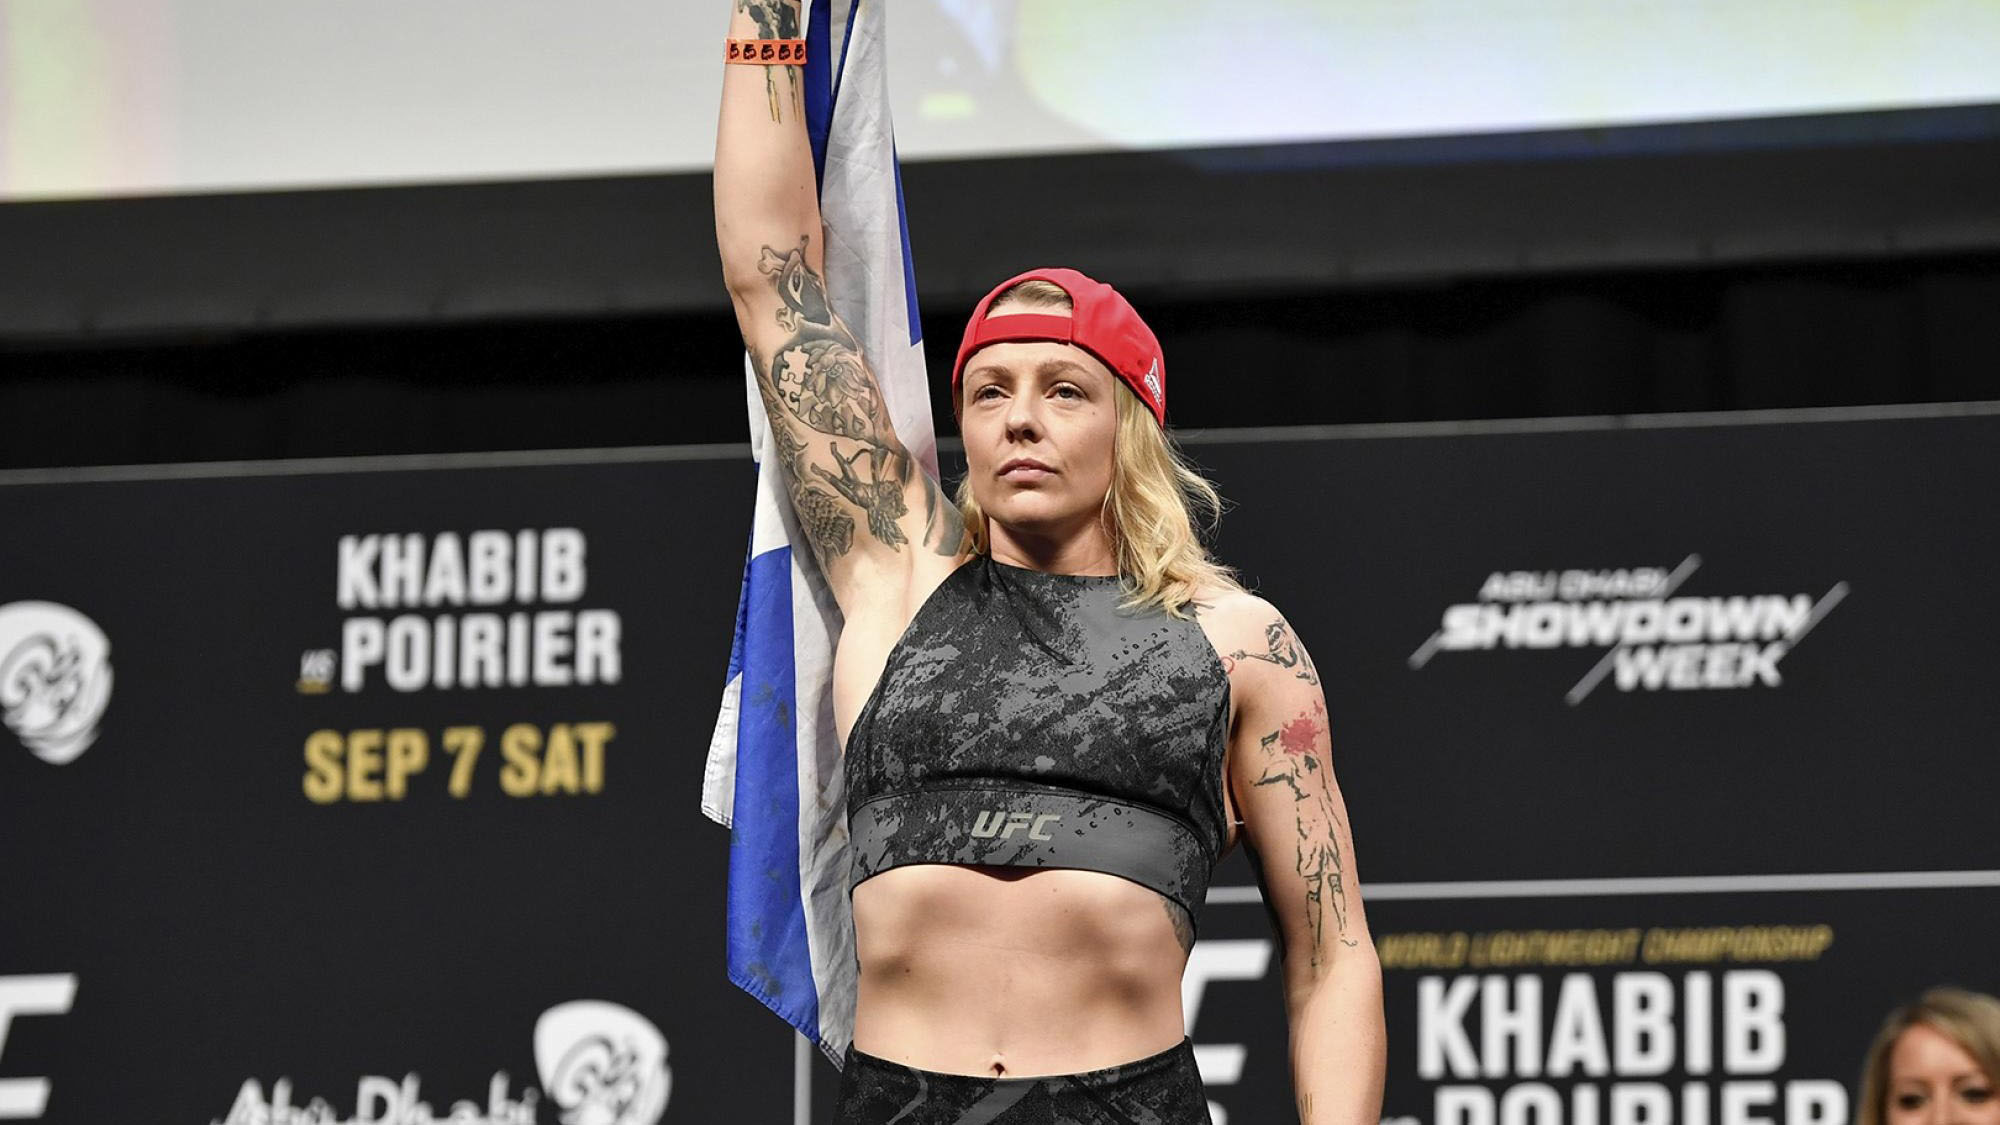 Joanne Calderwood (born 23 December 1986) is a Scottish professional mixed martial artist and former Muay Thai champion who competes in the Women's Fl...